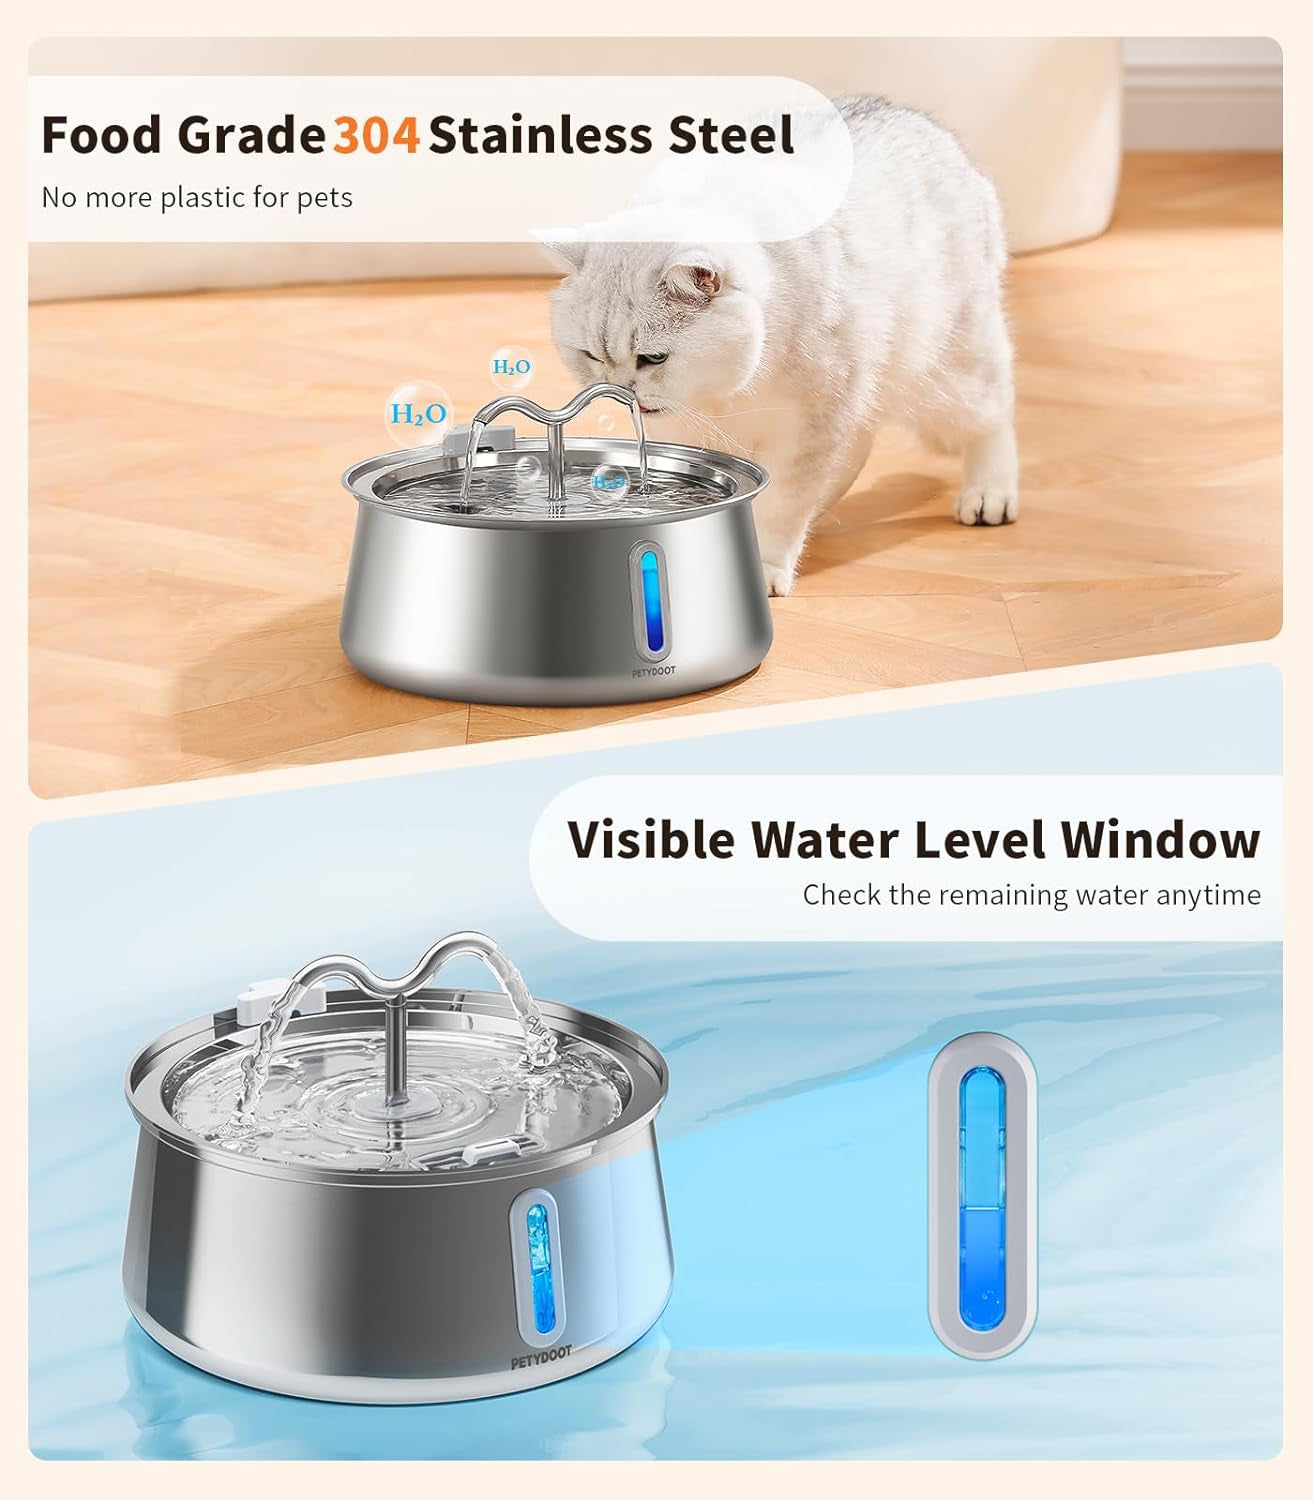 Cat Water Fountain Stainless Steel:135Oz/4L Large Capacity Cat Fountain with Water Window, Pet Fountain for Cats Dogs Multiple Pets Drinking Water Bowl Ultra Quite Pump Two Flow Modes, Dishwasher Safe